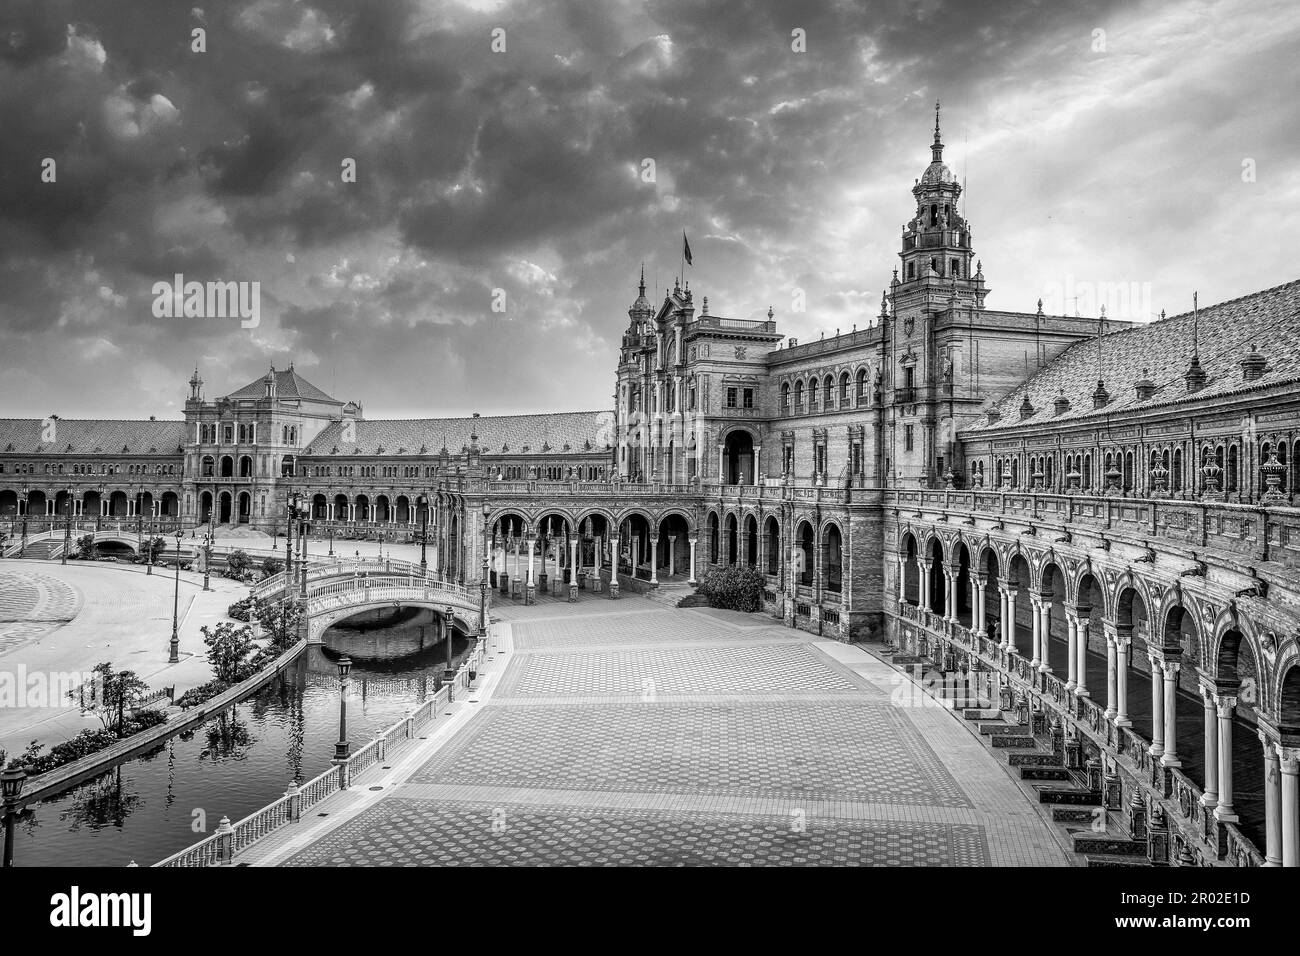 Spain, Seville. Spain Square, a landmark example of the Renaissance Revival style in Spanish architecture Stock Photo